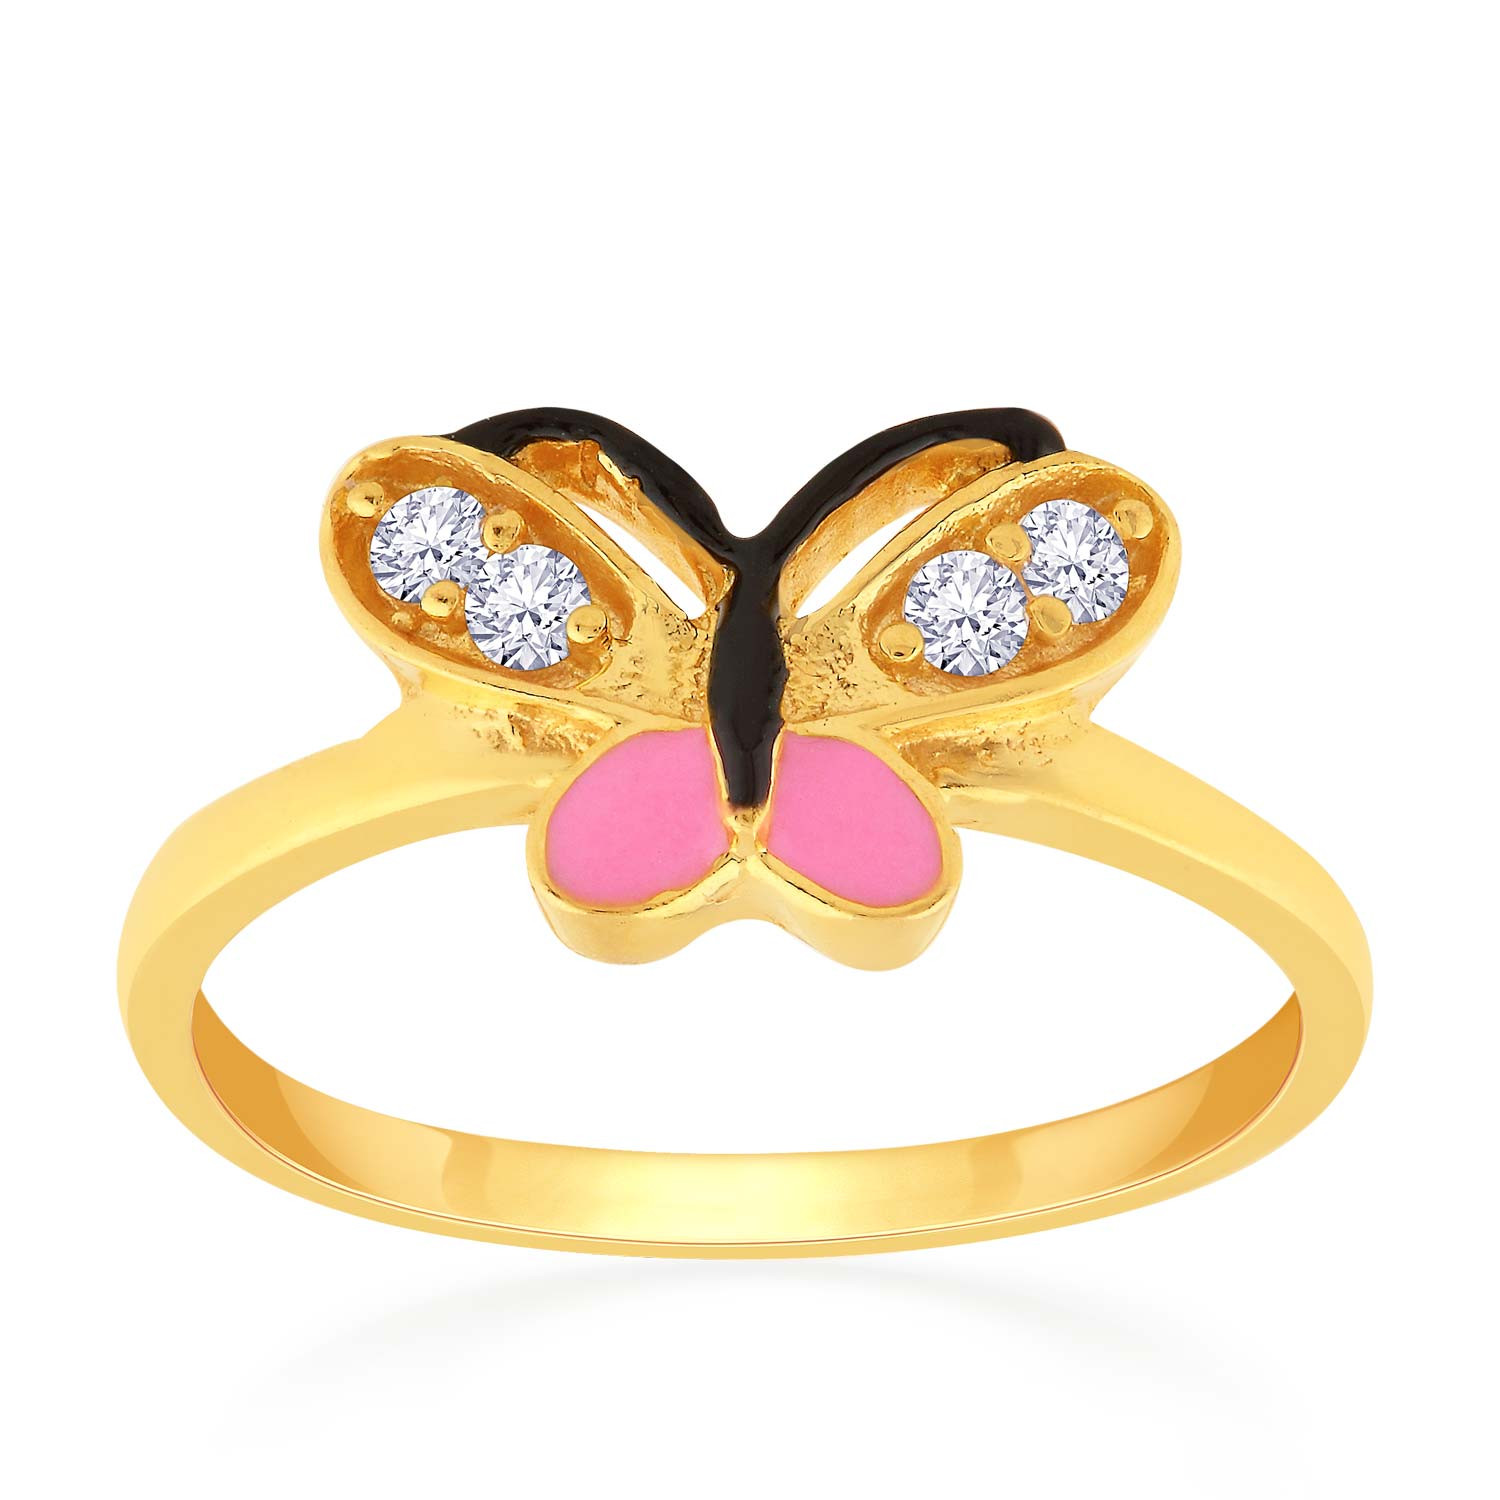 Kids Gold Buckle Ring with Stones – Bling King